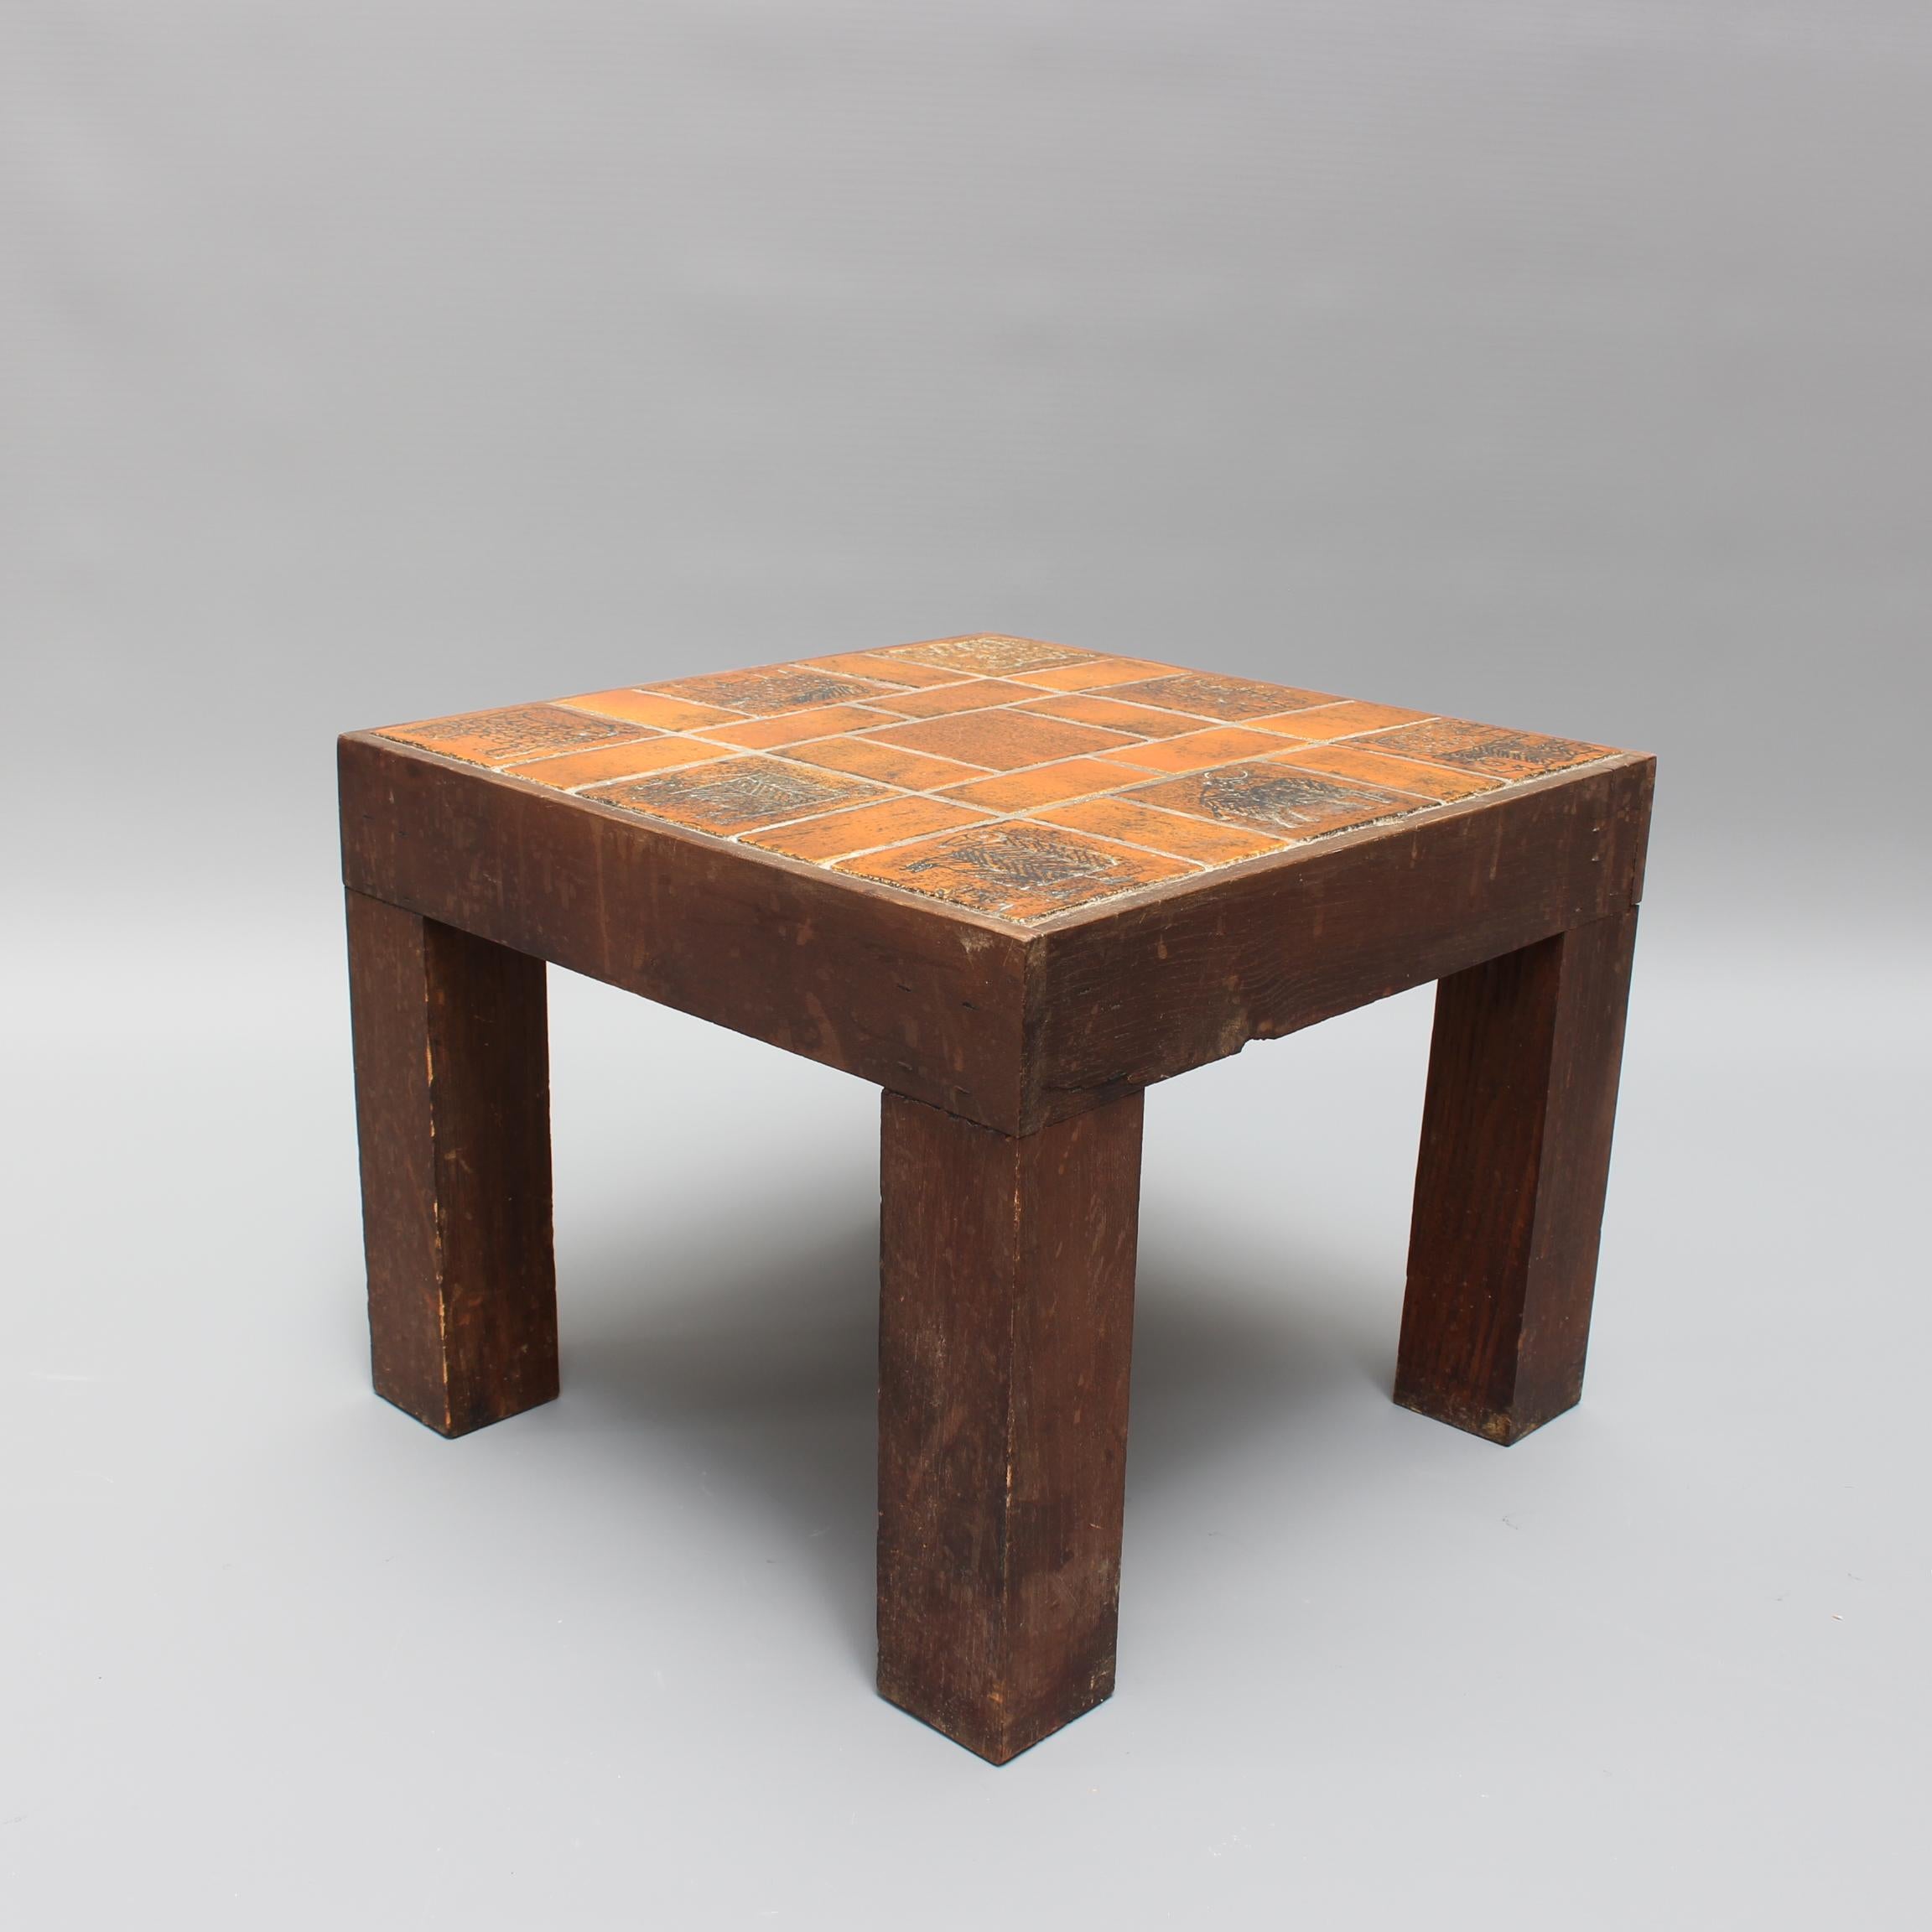 Mid-20th Century Vintage French Square Side Table with Ceramic Tile Top by Jacques Blin, c. 1950s For Sale